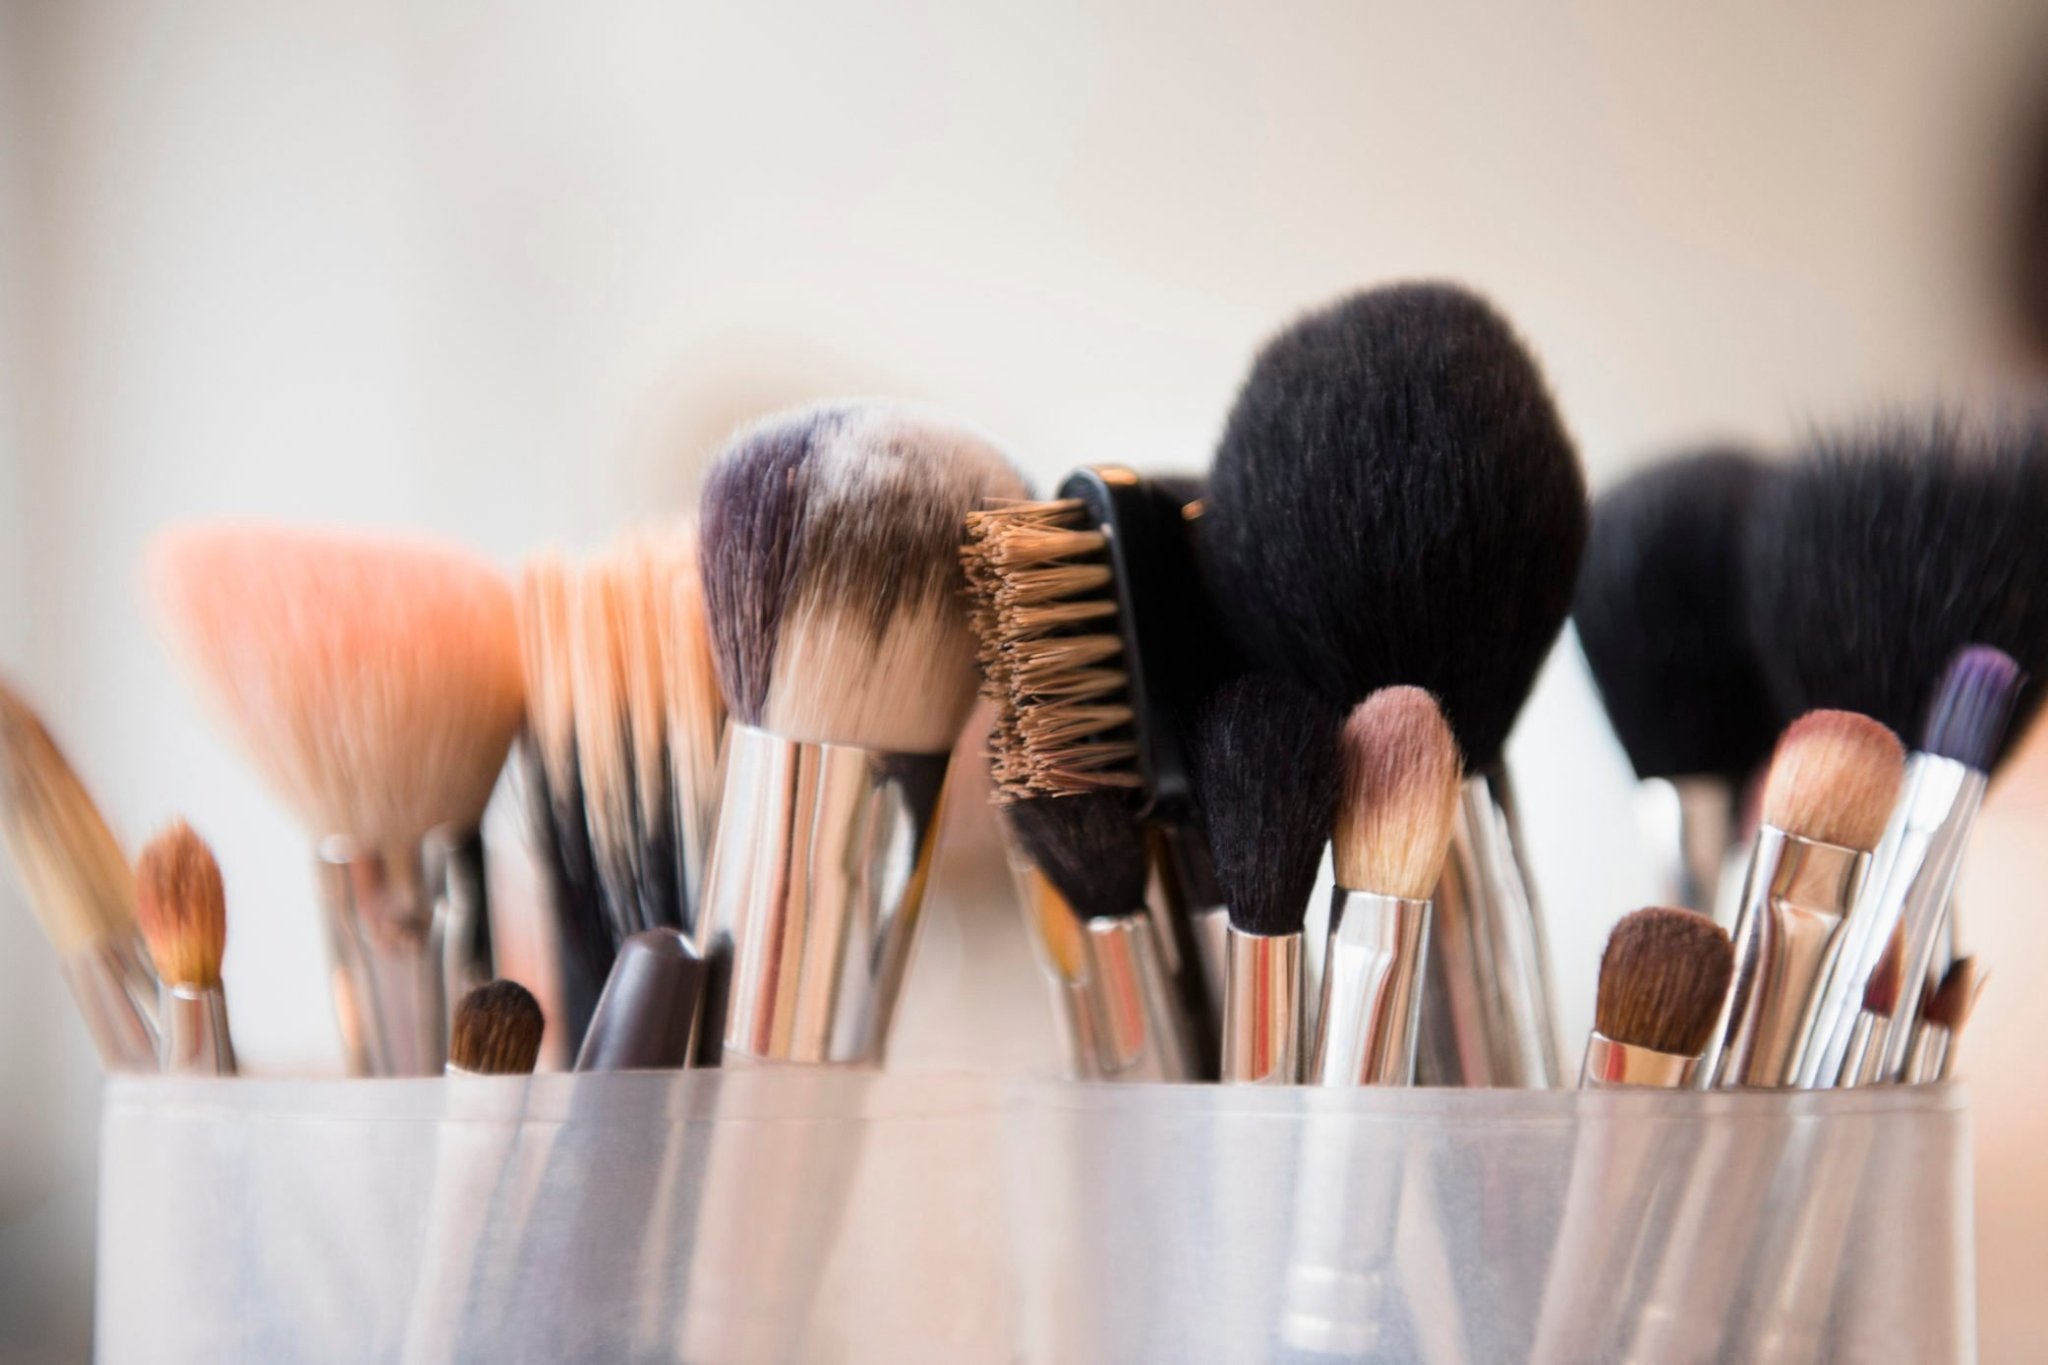 Here’s a Step-by-Step Guide on How to Clean Makeup Brushes